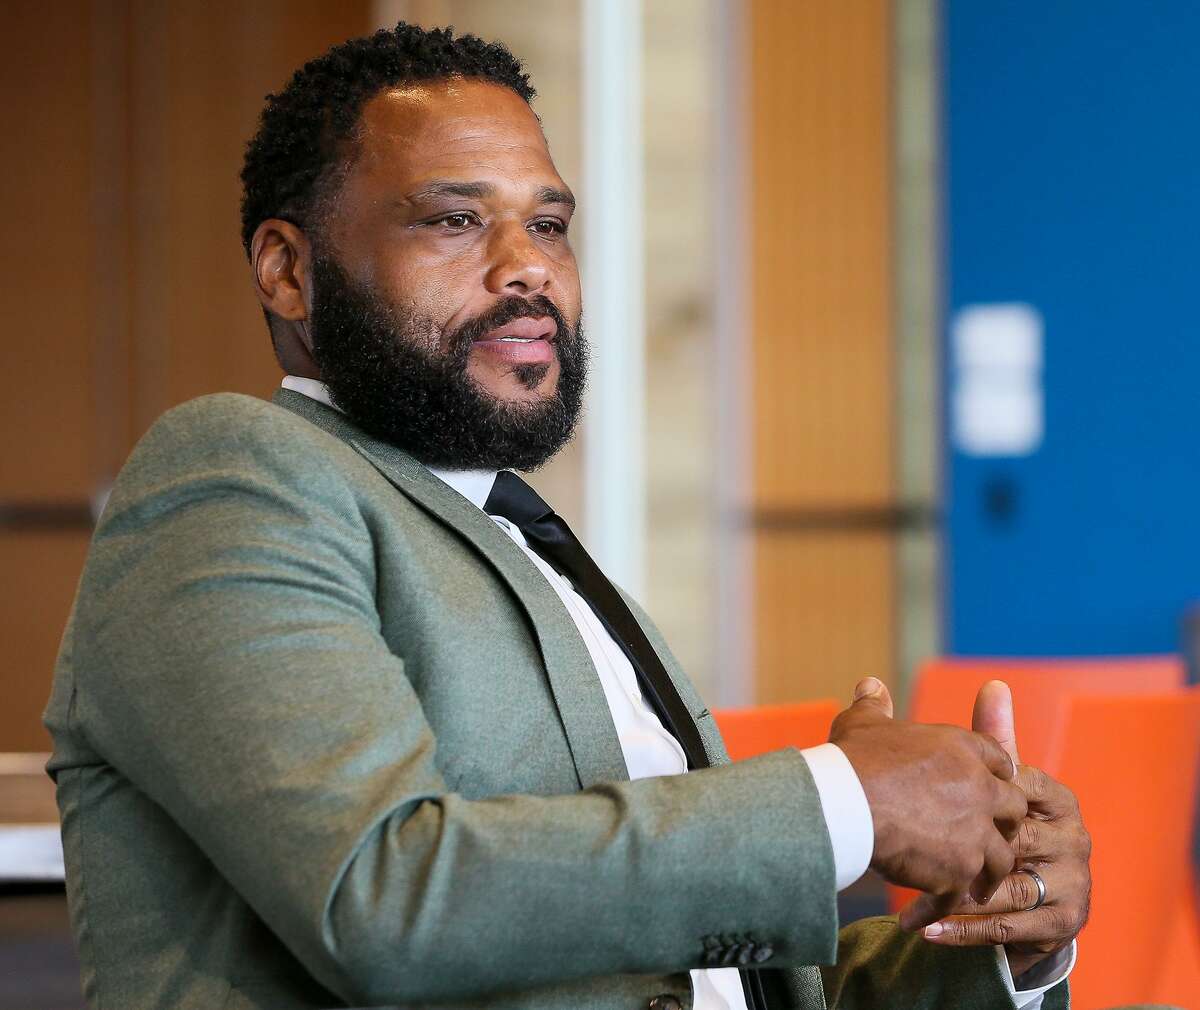 Actor Anthony Anderson discusses his diabetes journey and how minorities are struggling with the illness during an interview at the NAACP convention at the Convention Center on Sunday, July 15, 2018.